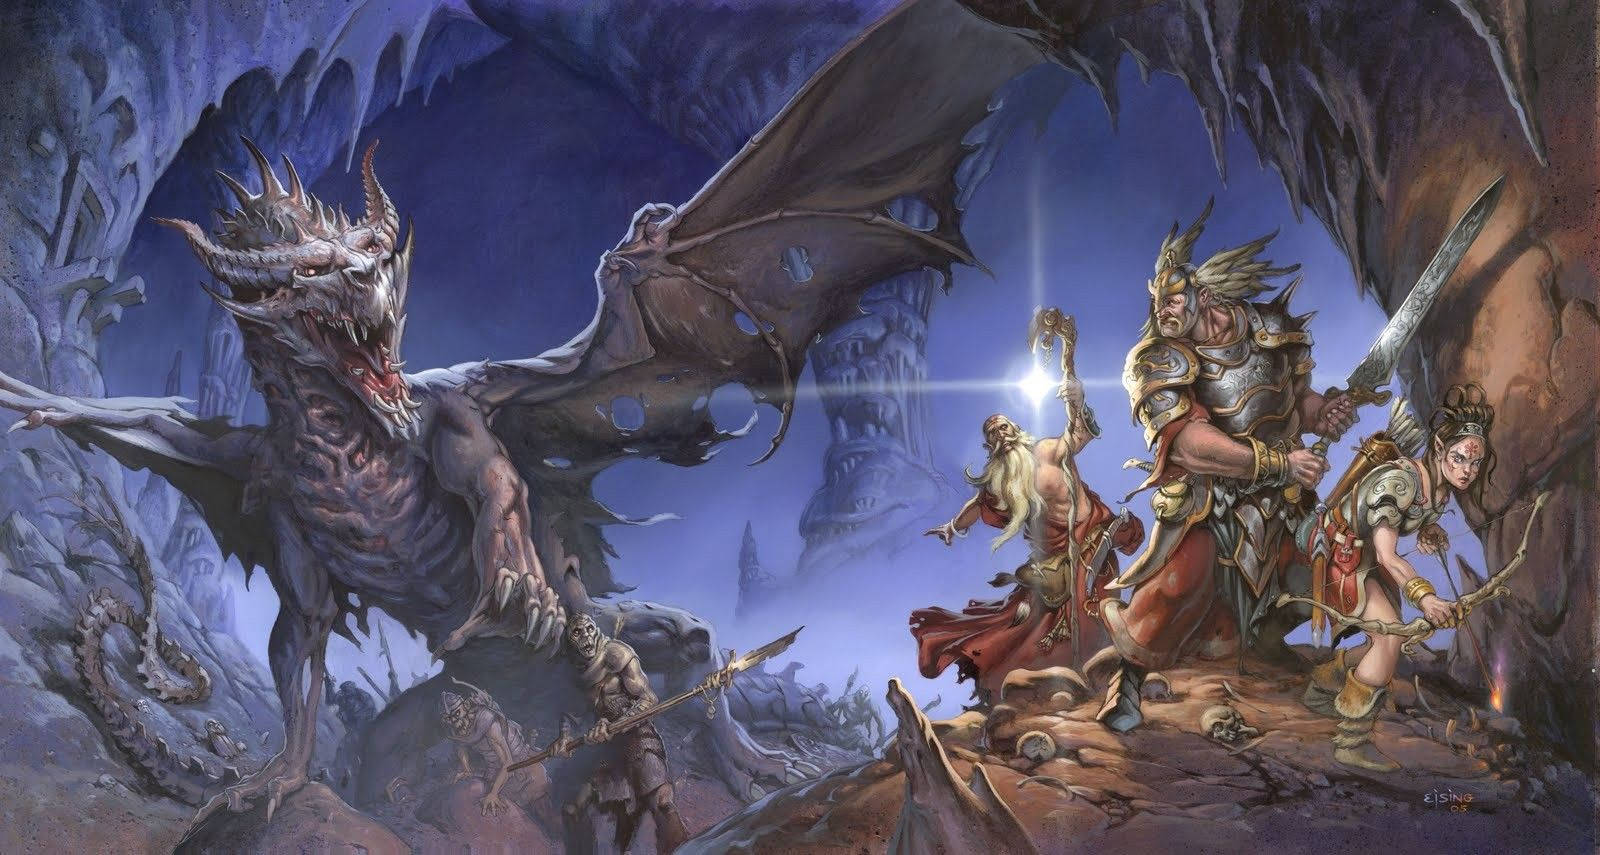 Forge Your Own Path In The Dungeons And Dragons Cave Adventure Wallpaper